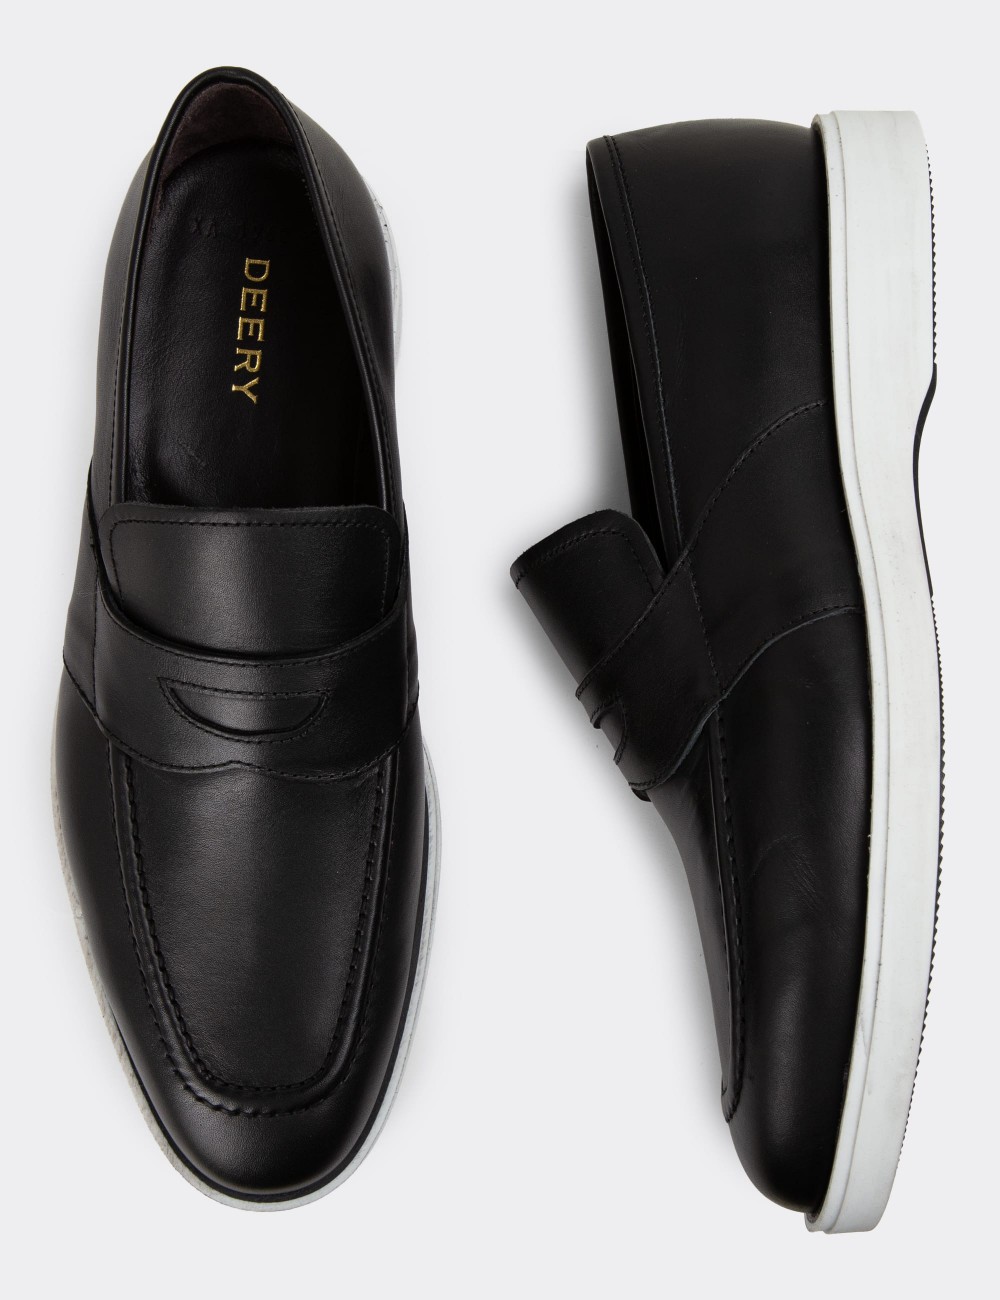 Black Leather Loafers - 01960MSYHC01